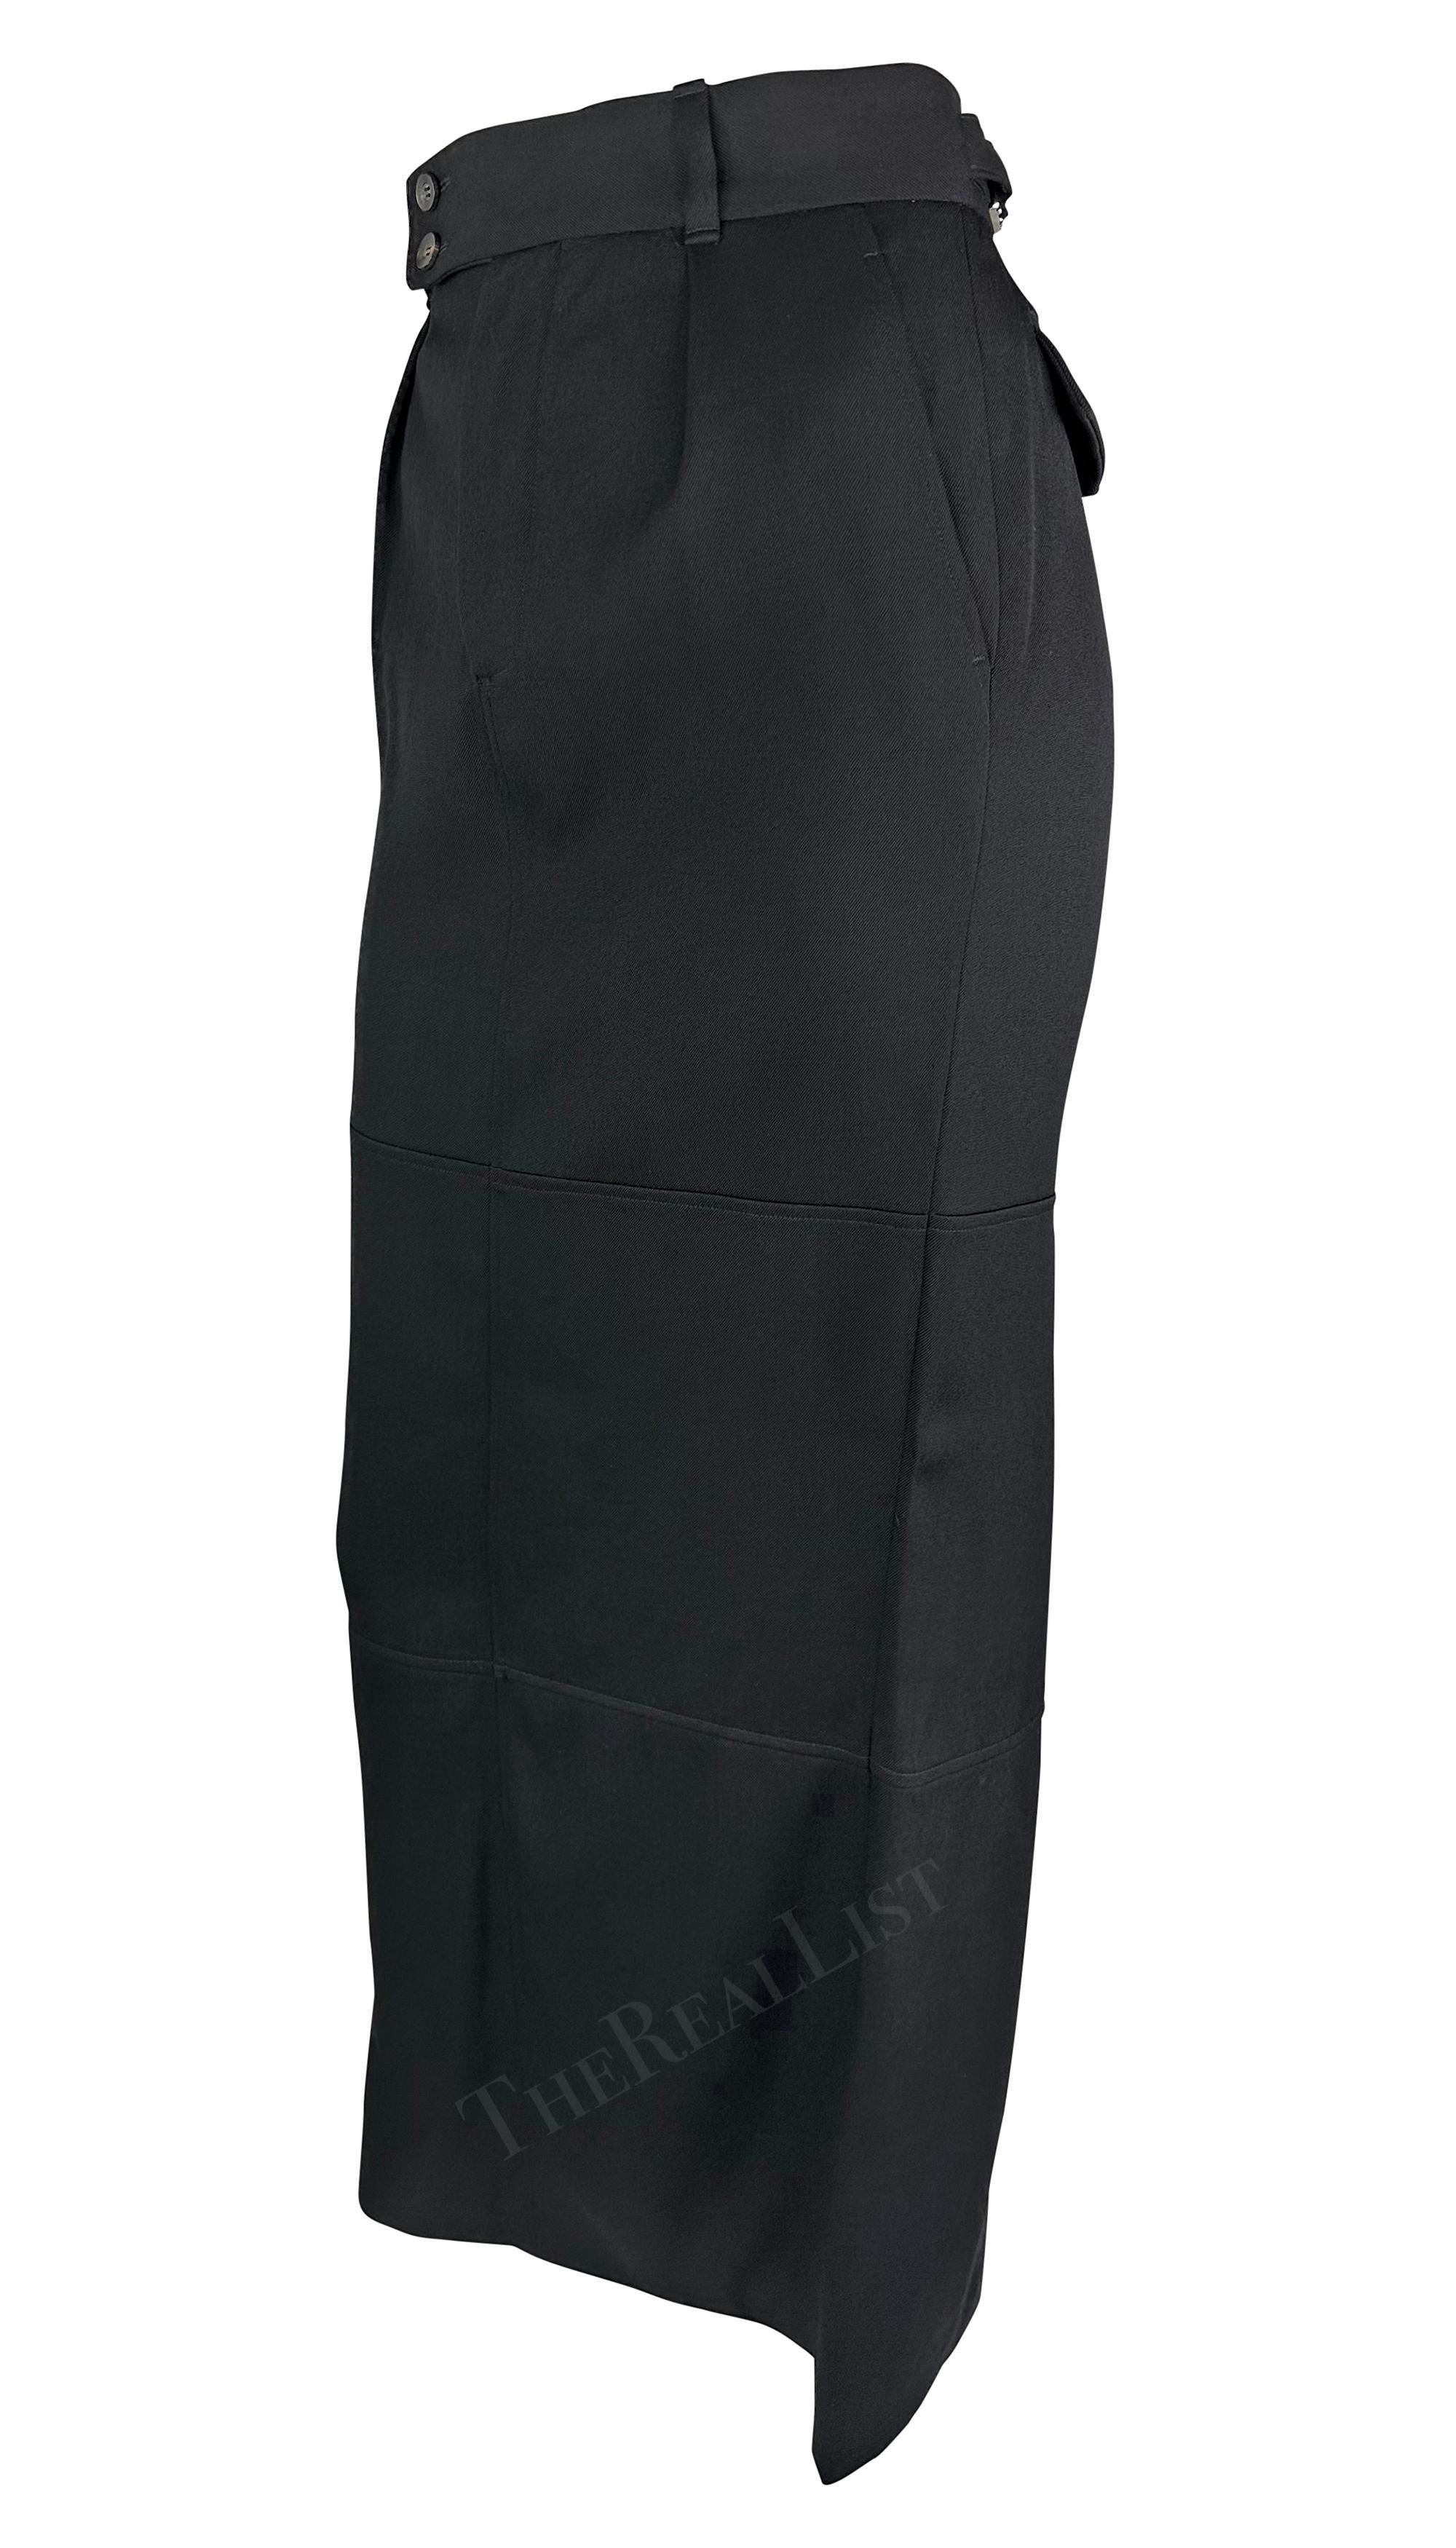 F/W 1998 Gucci by Tom Ford Runway Ad Black Buckle Wool Slit Maxi Skirt For Sale 5